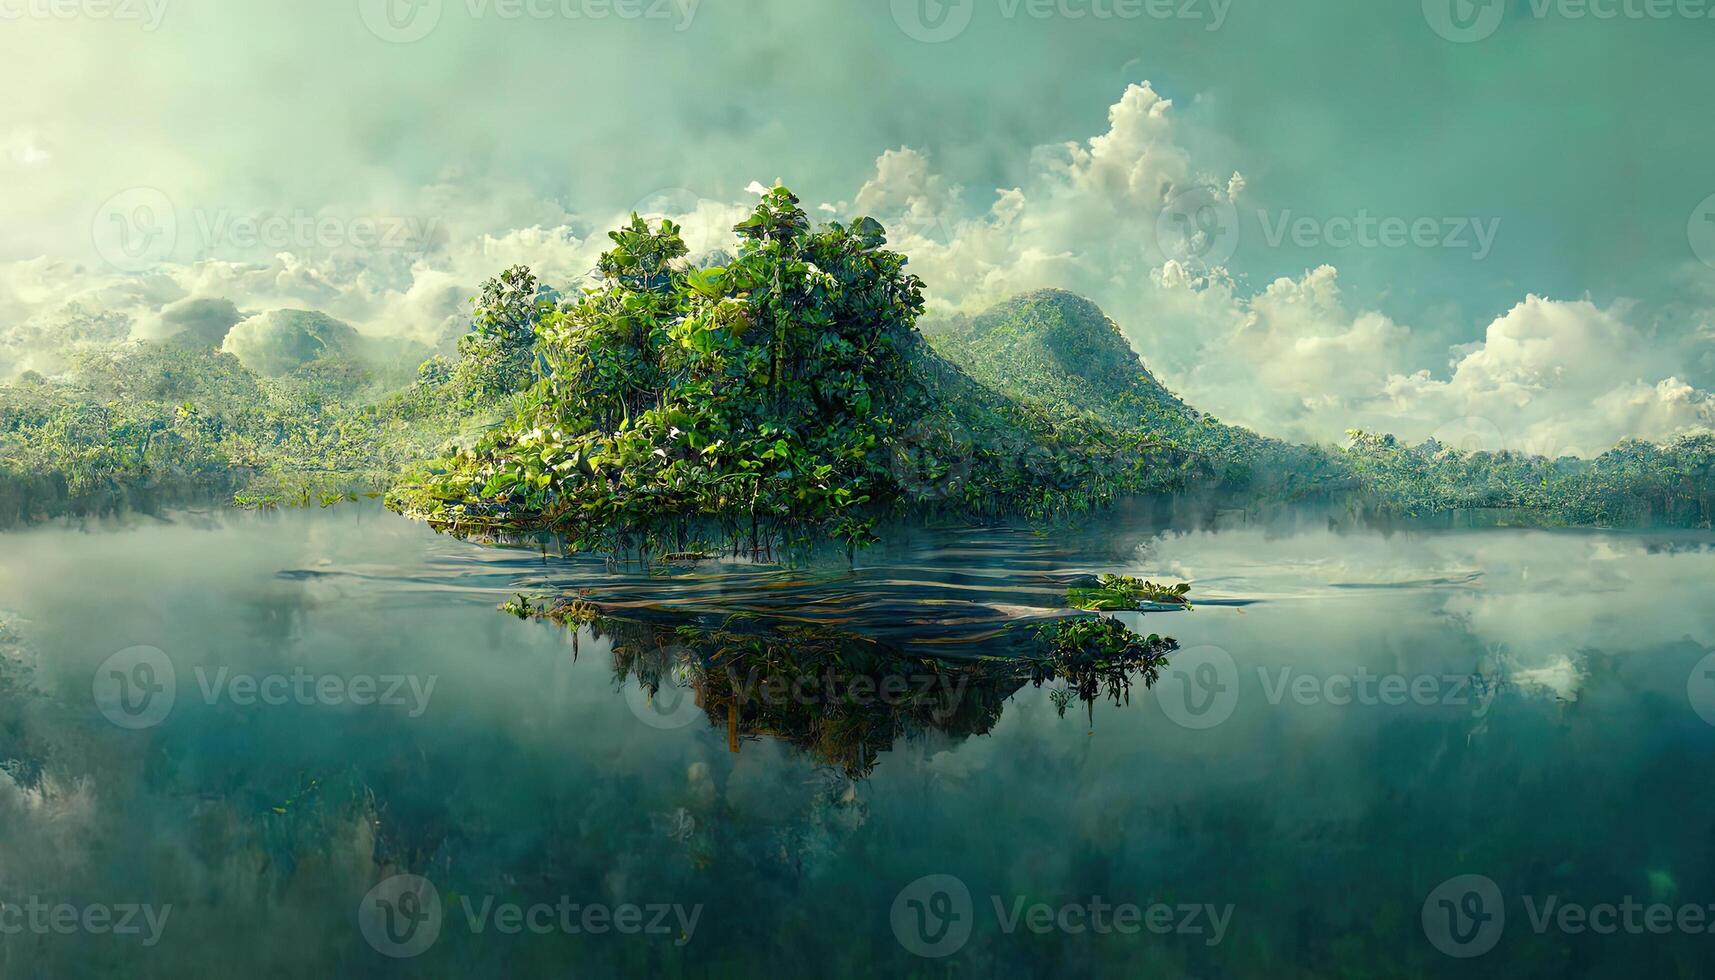 Awesome A conceptual image showing a lung-shaped lake in a lush and pristine jungle. photo